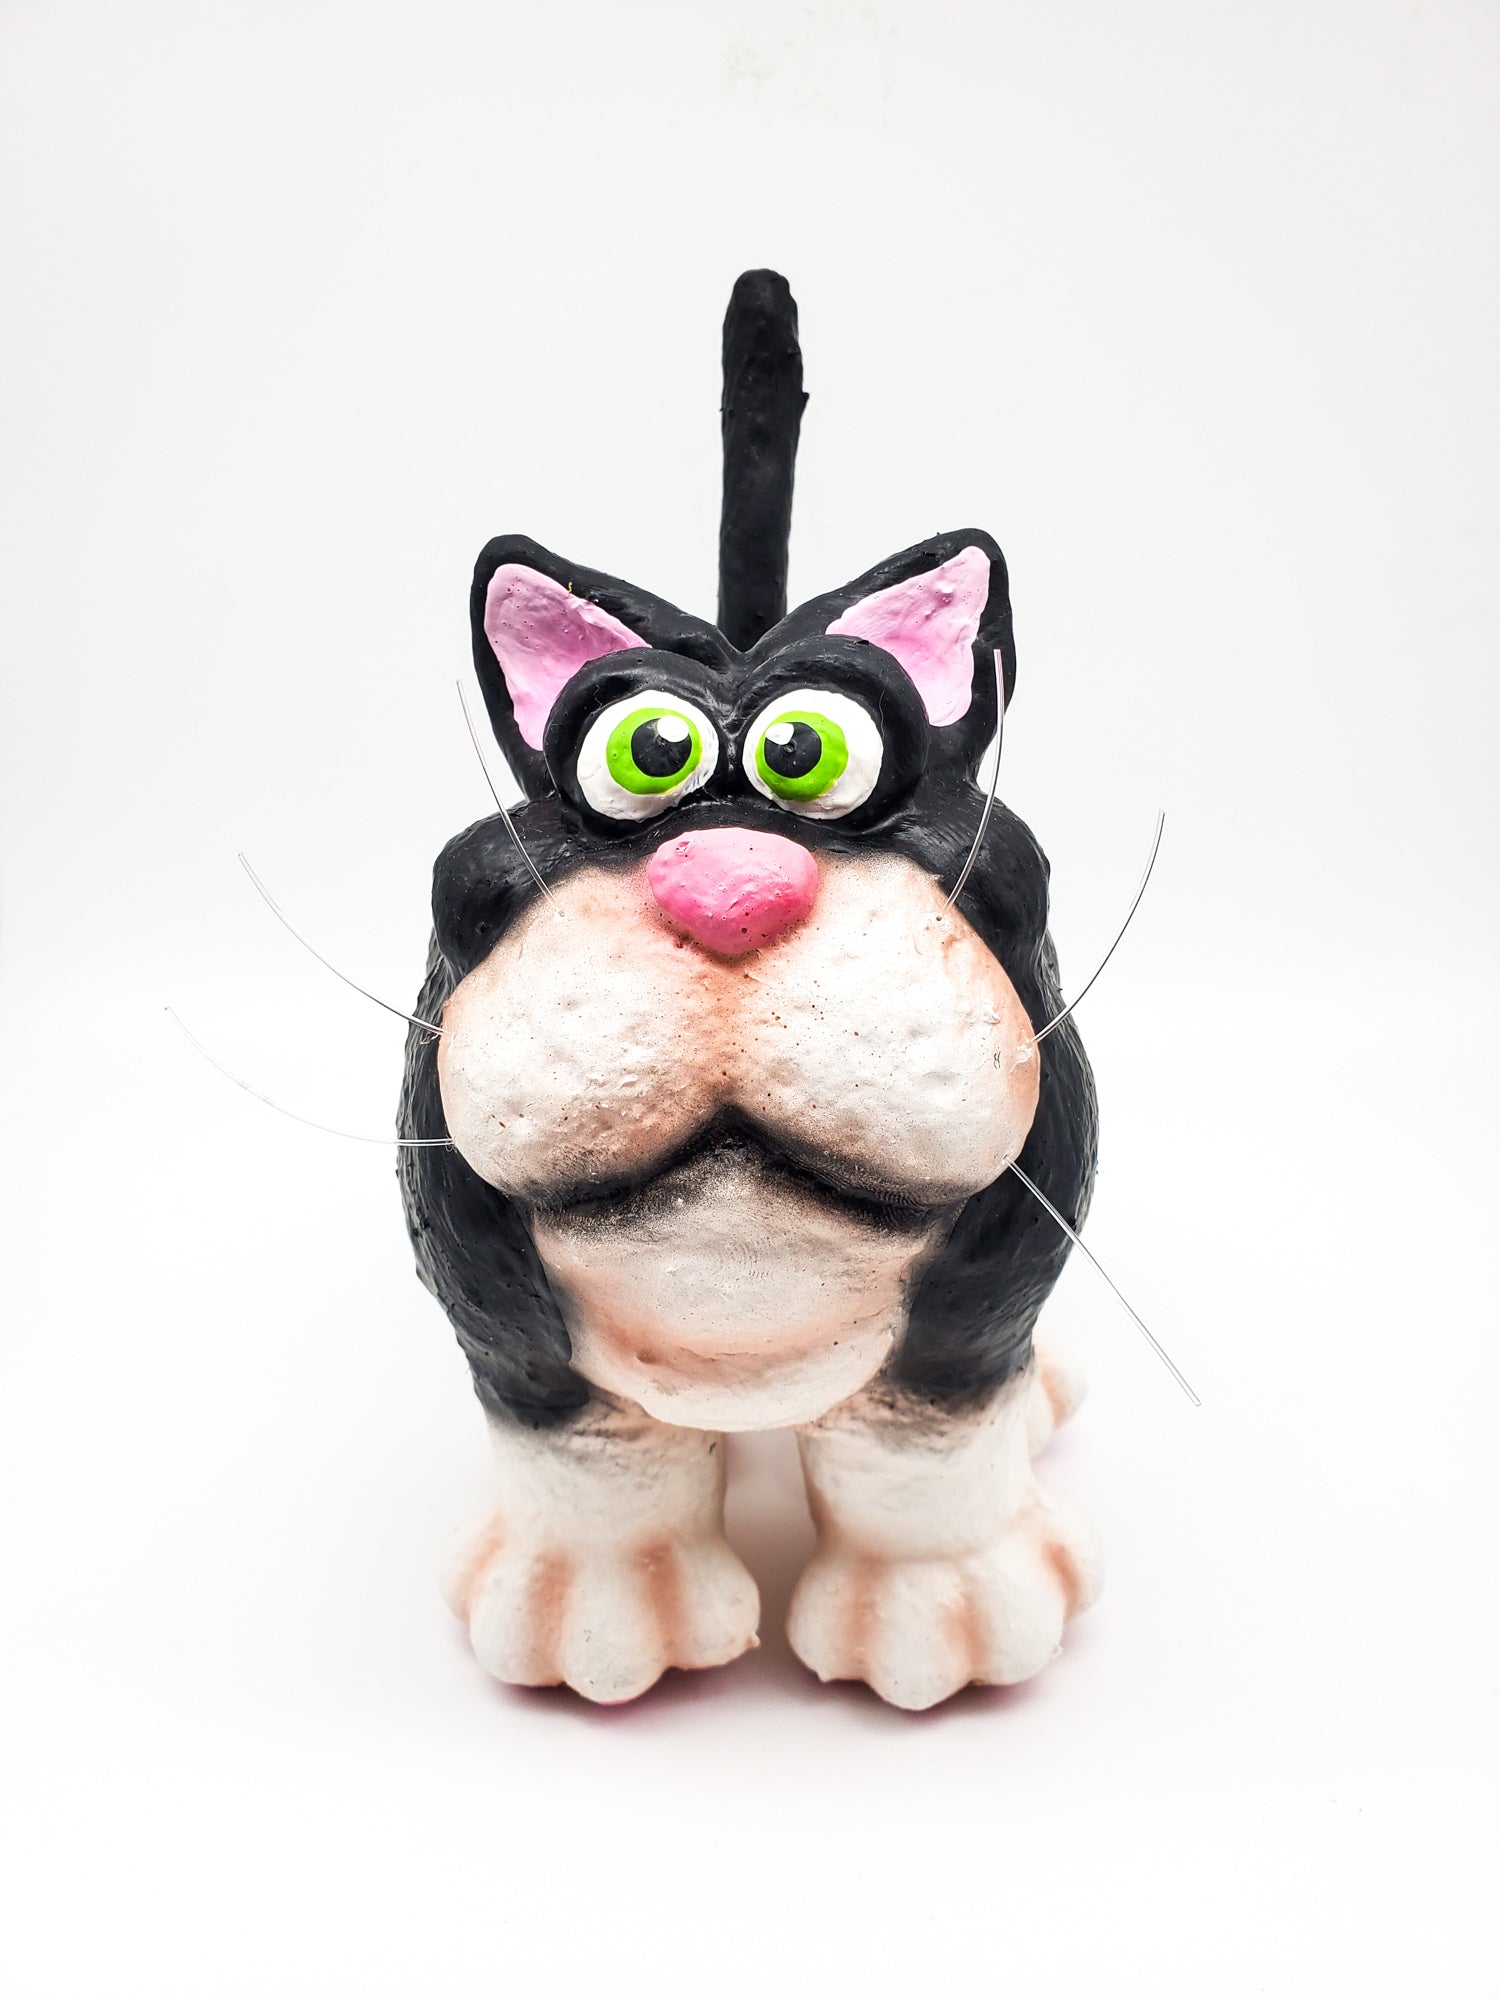 Black and White Chonky Cat - Soft Sculpture